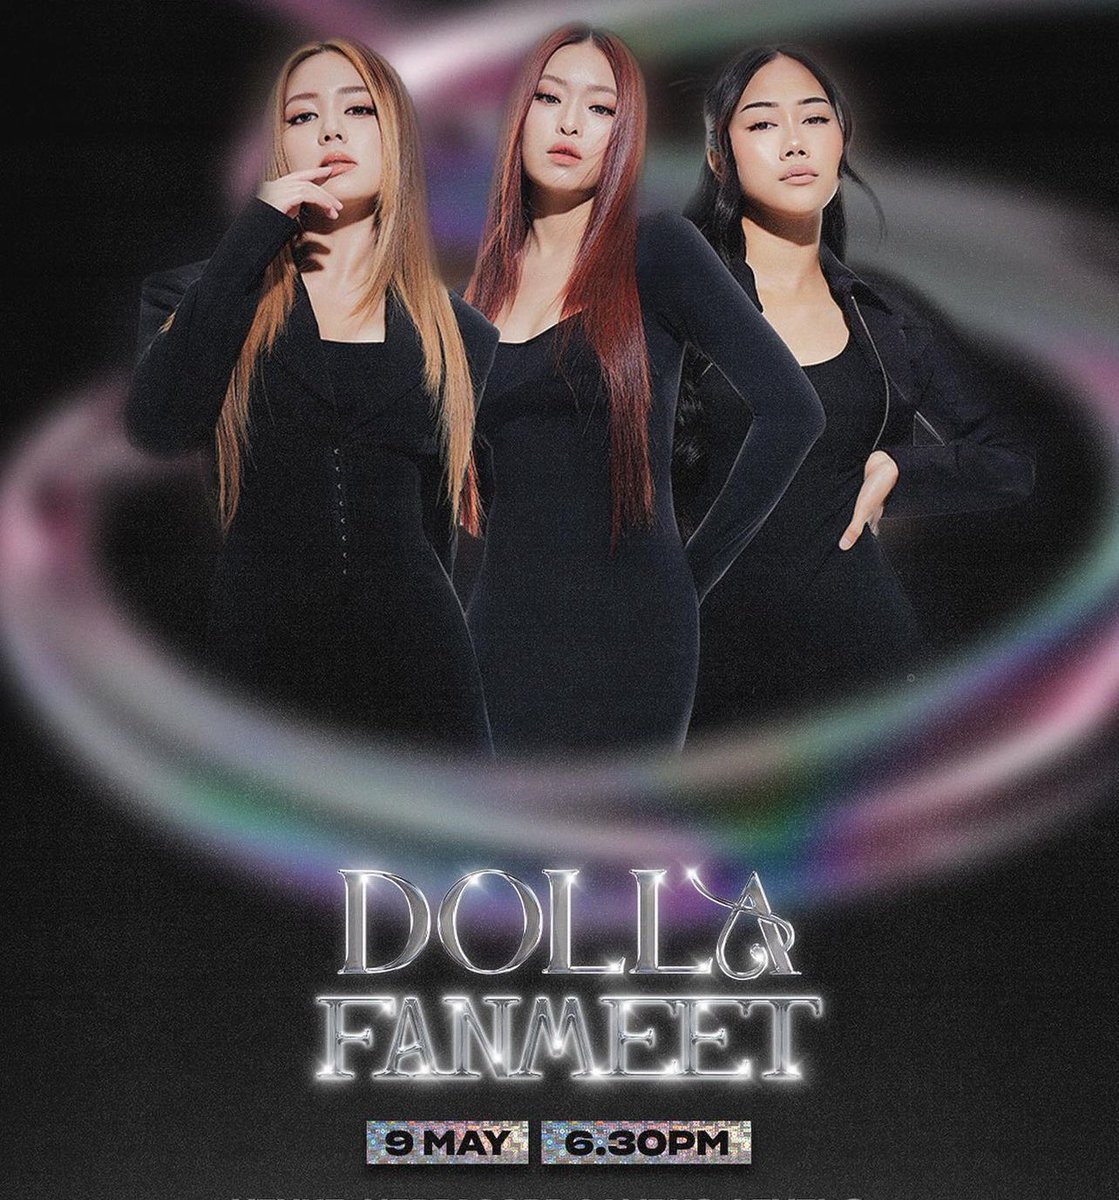 SG iDollas are you ready for today? DOLLA’s in your town ❤️‍🔥 #DOLLA #DollaFanMeet #Singapore